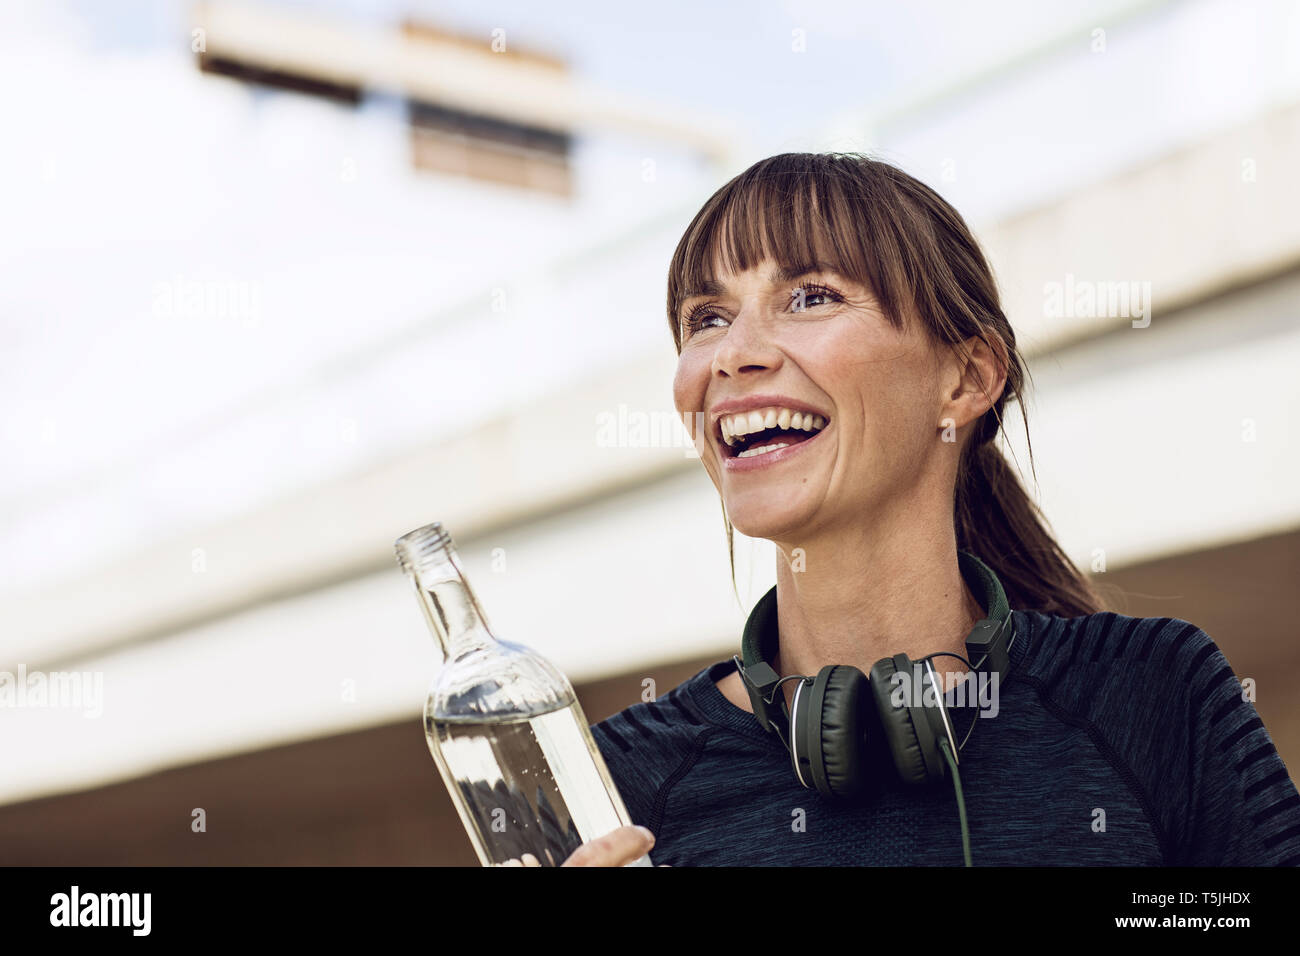 Sportive woman with headphones, doing her fitness training outdoors Stock Photo